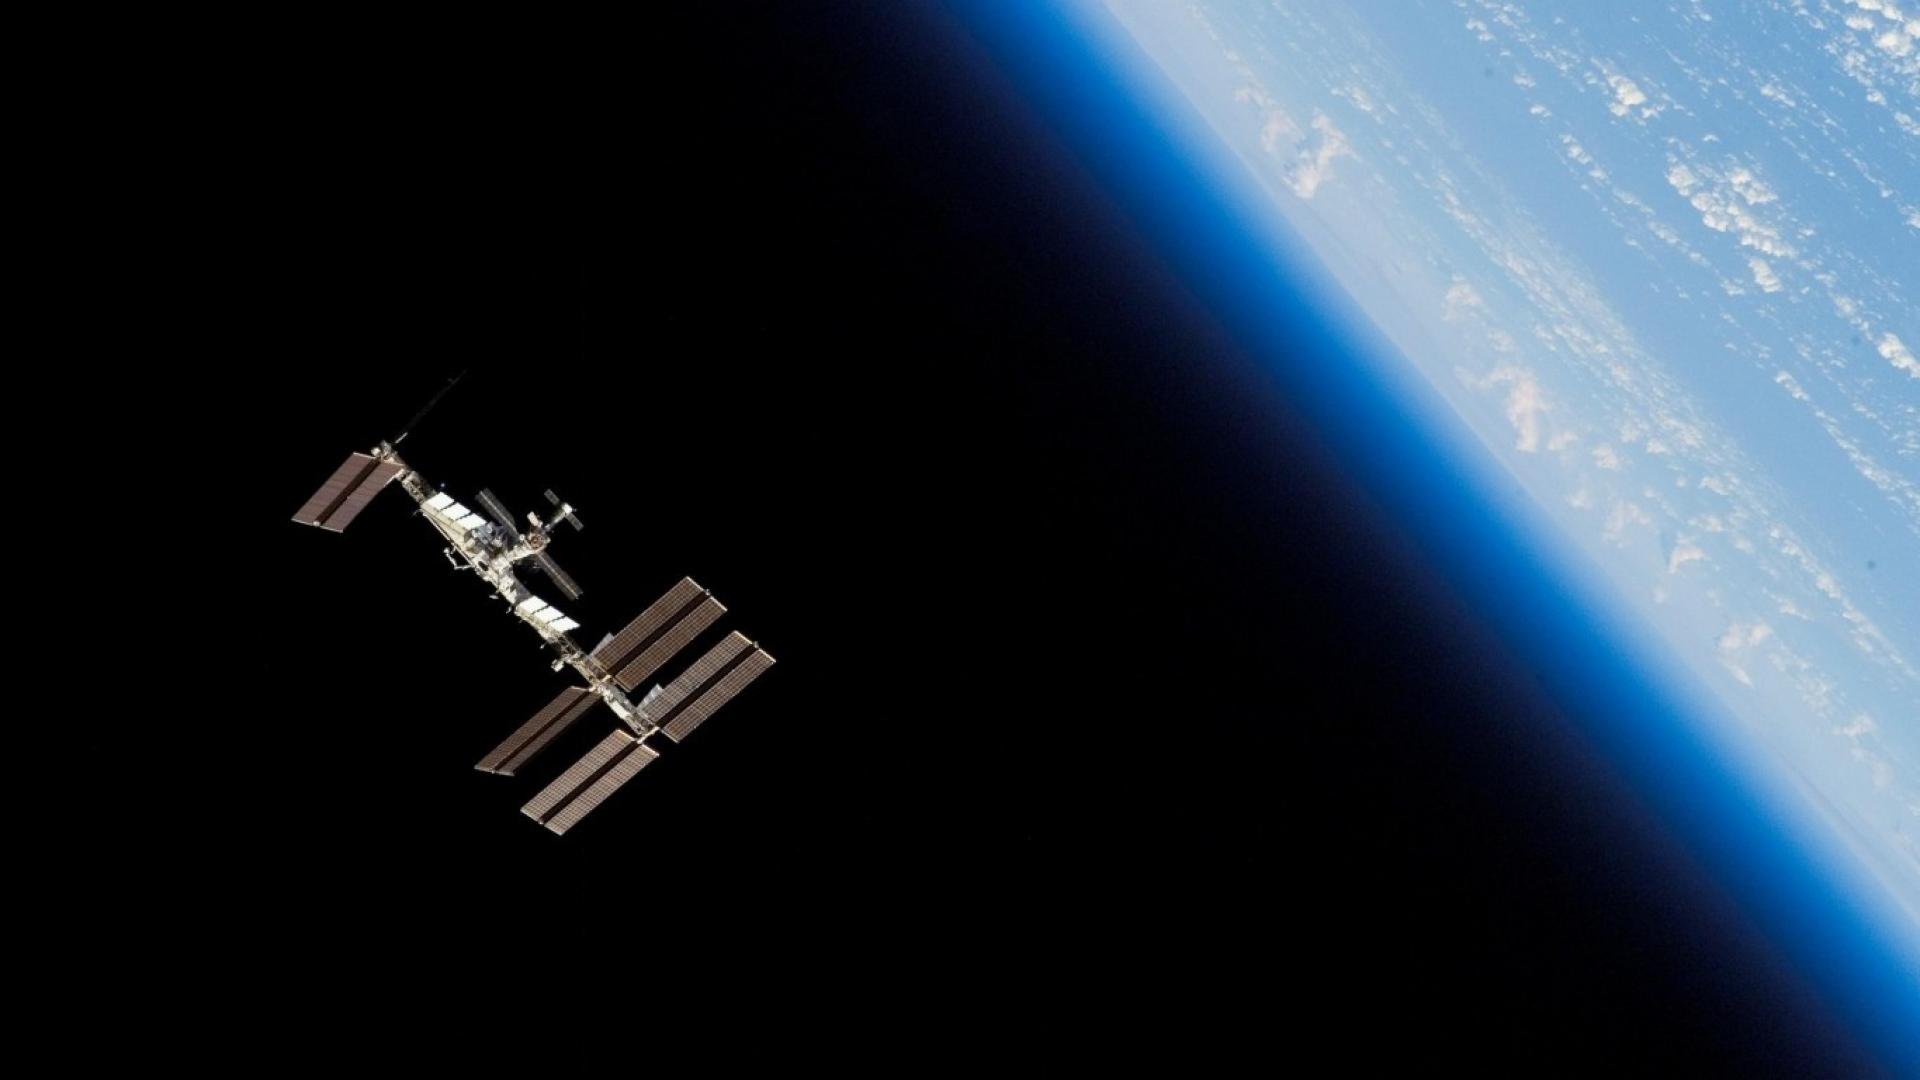 Station Iss Orbit Pla Earth Space Wallpaper